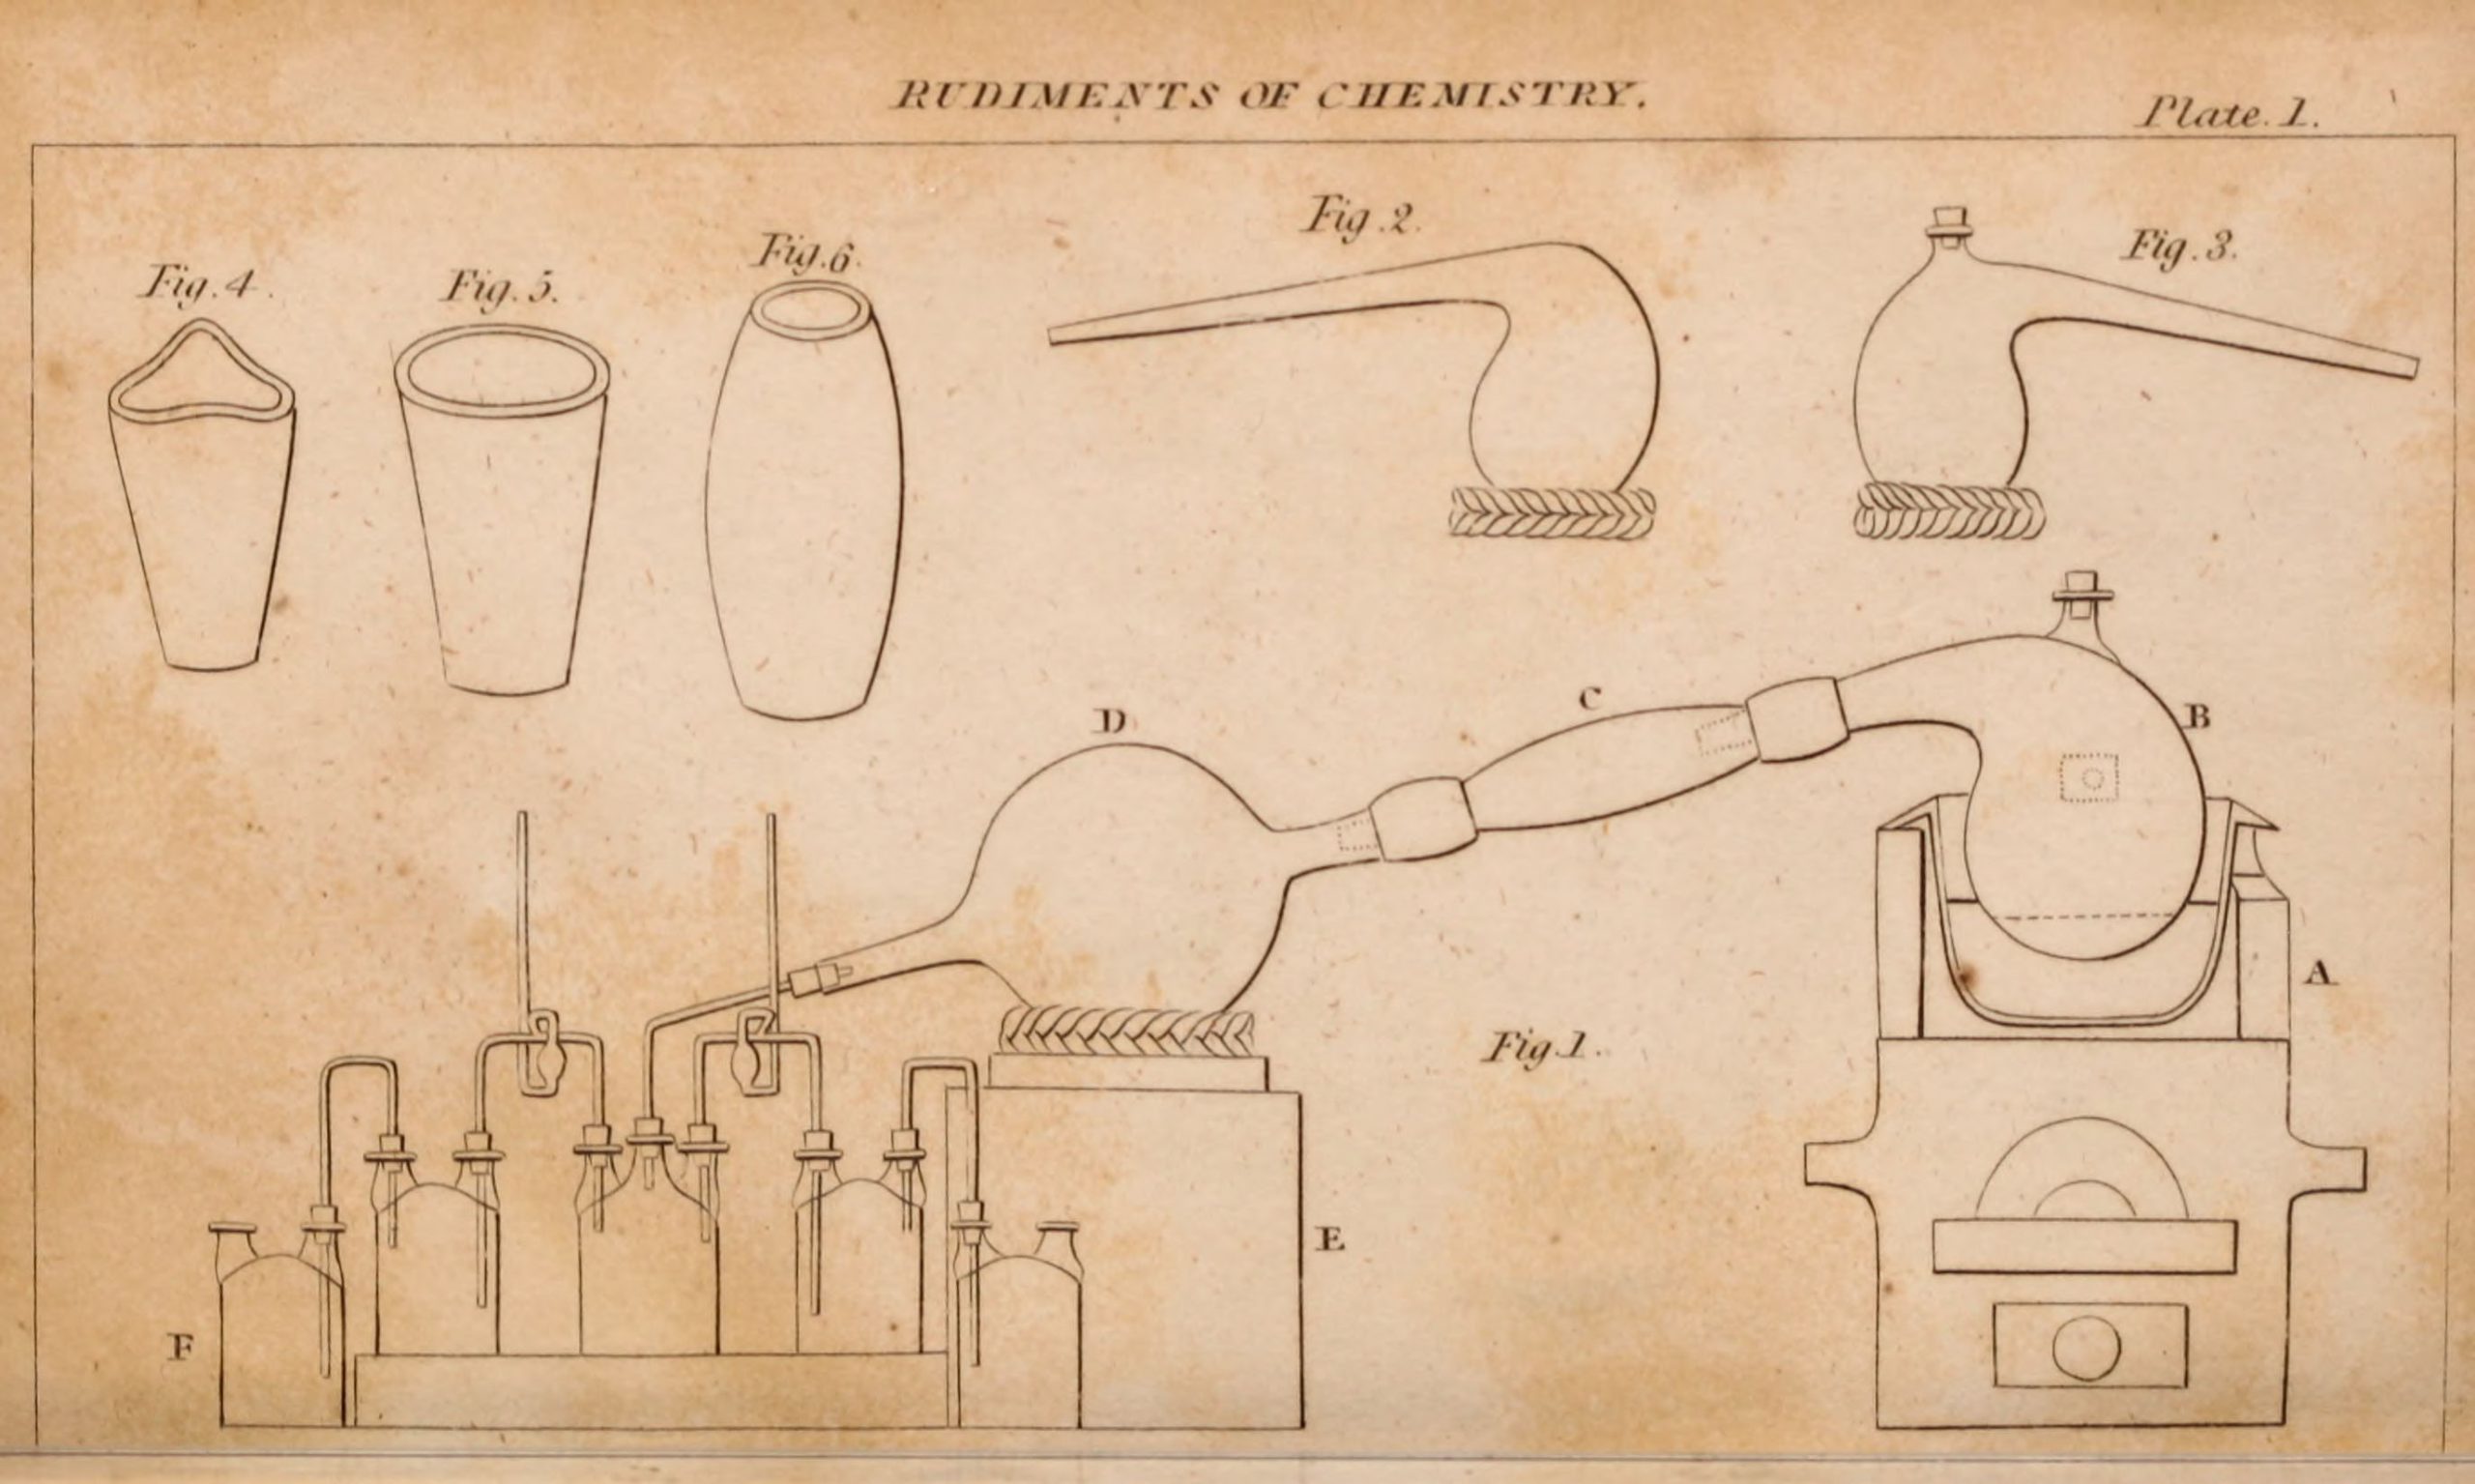 Handdrawn image of apparatus used in scientific study.